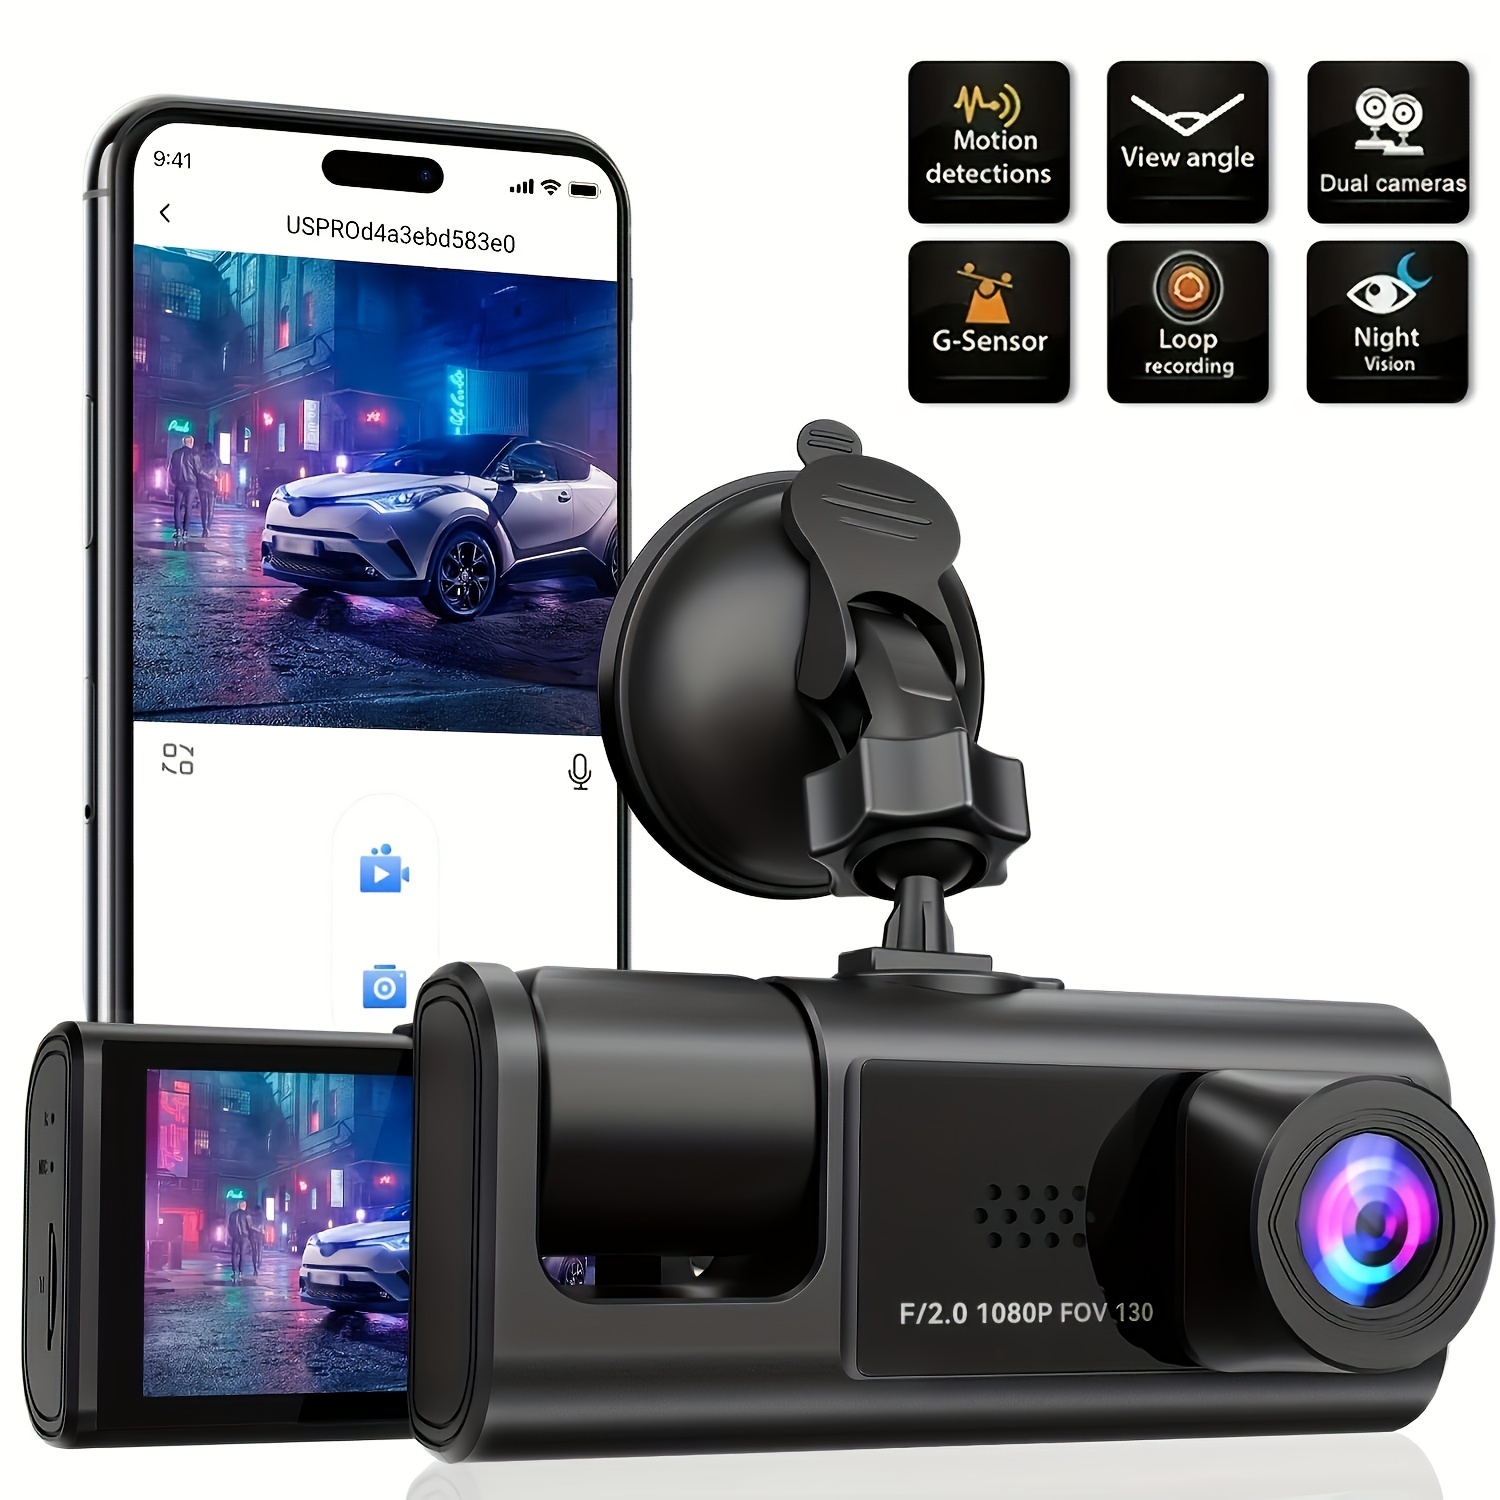 Dash Cam 2K, KAWA WiFi Dash Camera for Cars 1440P with Hand-Free Voice  Control, Night Vision, Mini Hidden Dashcam Front, Emergency Lock, Loop  Recording, 24-Hour Parking Monitor, APP, Support 256GB Max 